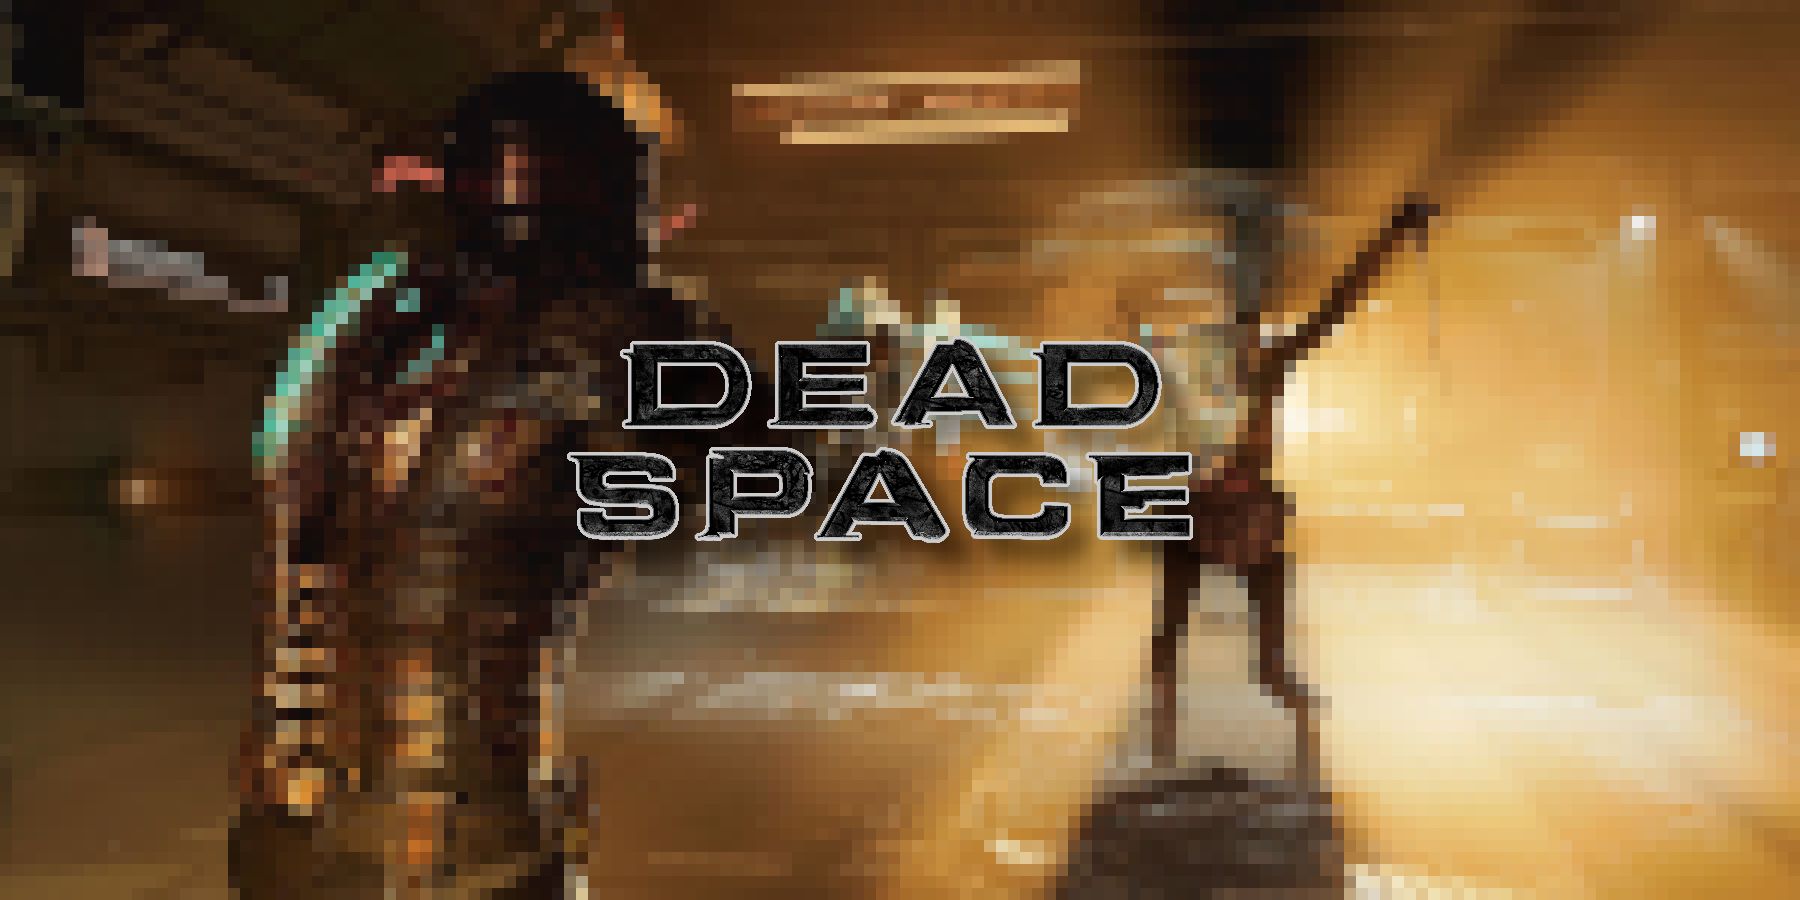 Image from Dead Space showing a pixelated Isaac Clarke shooting at a Necromorph.